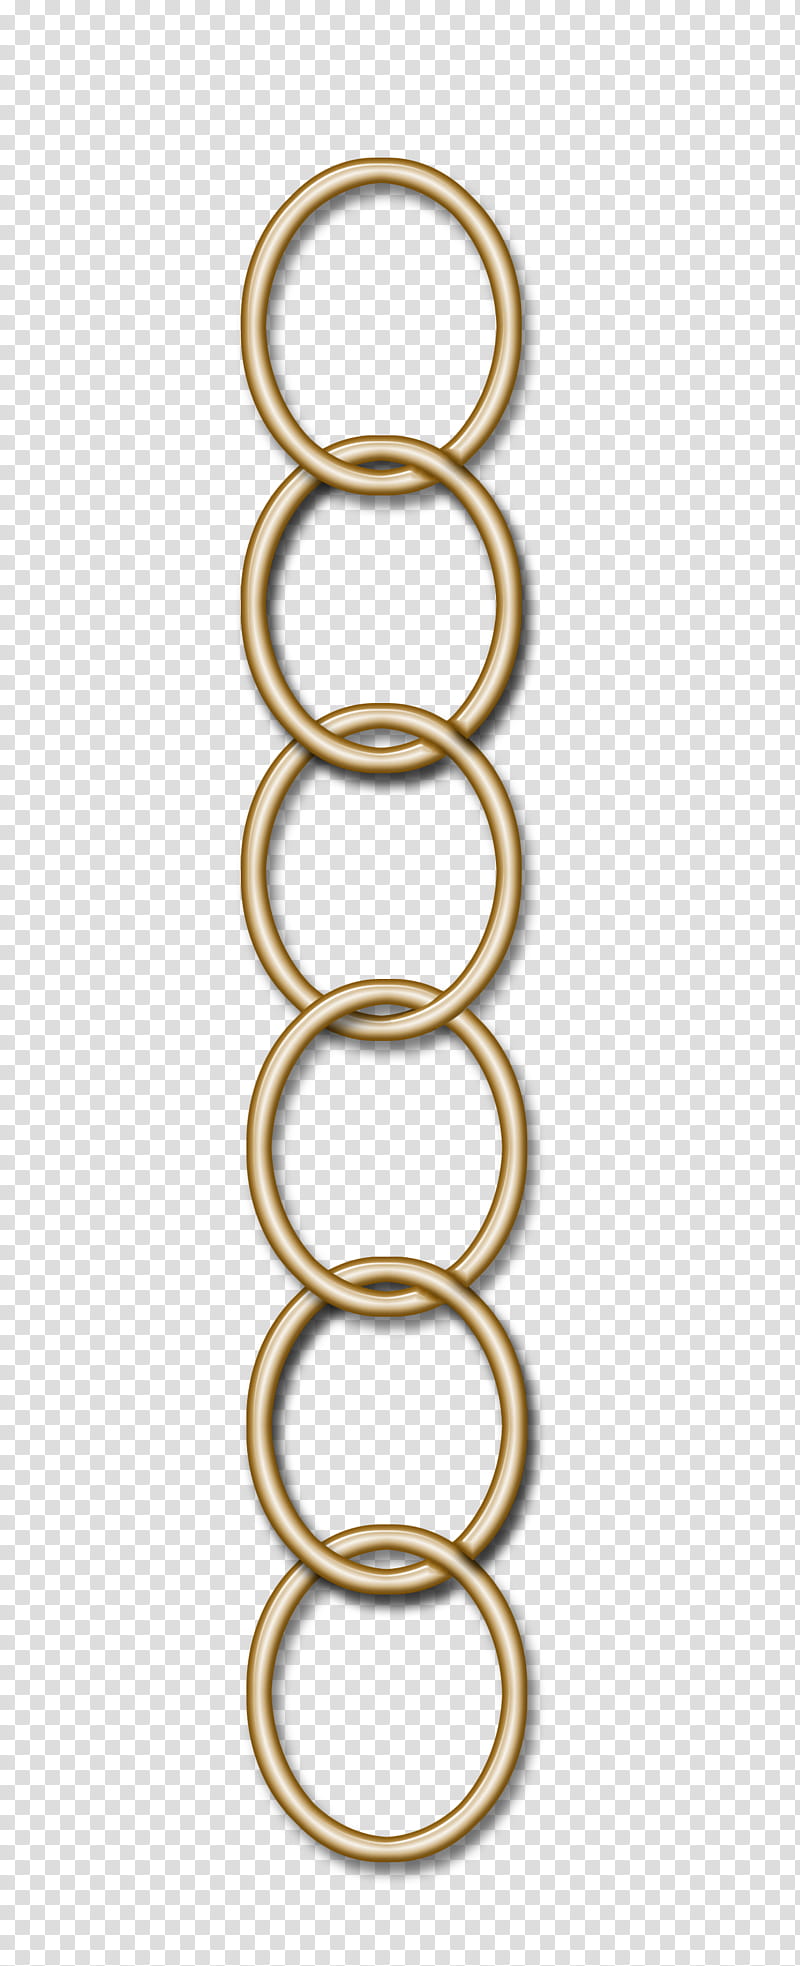 chain, gold-colored chain illustration transparent background PNG clipart